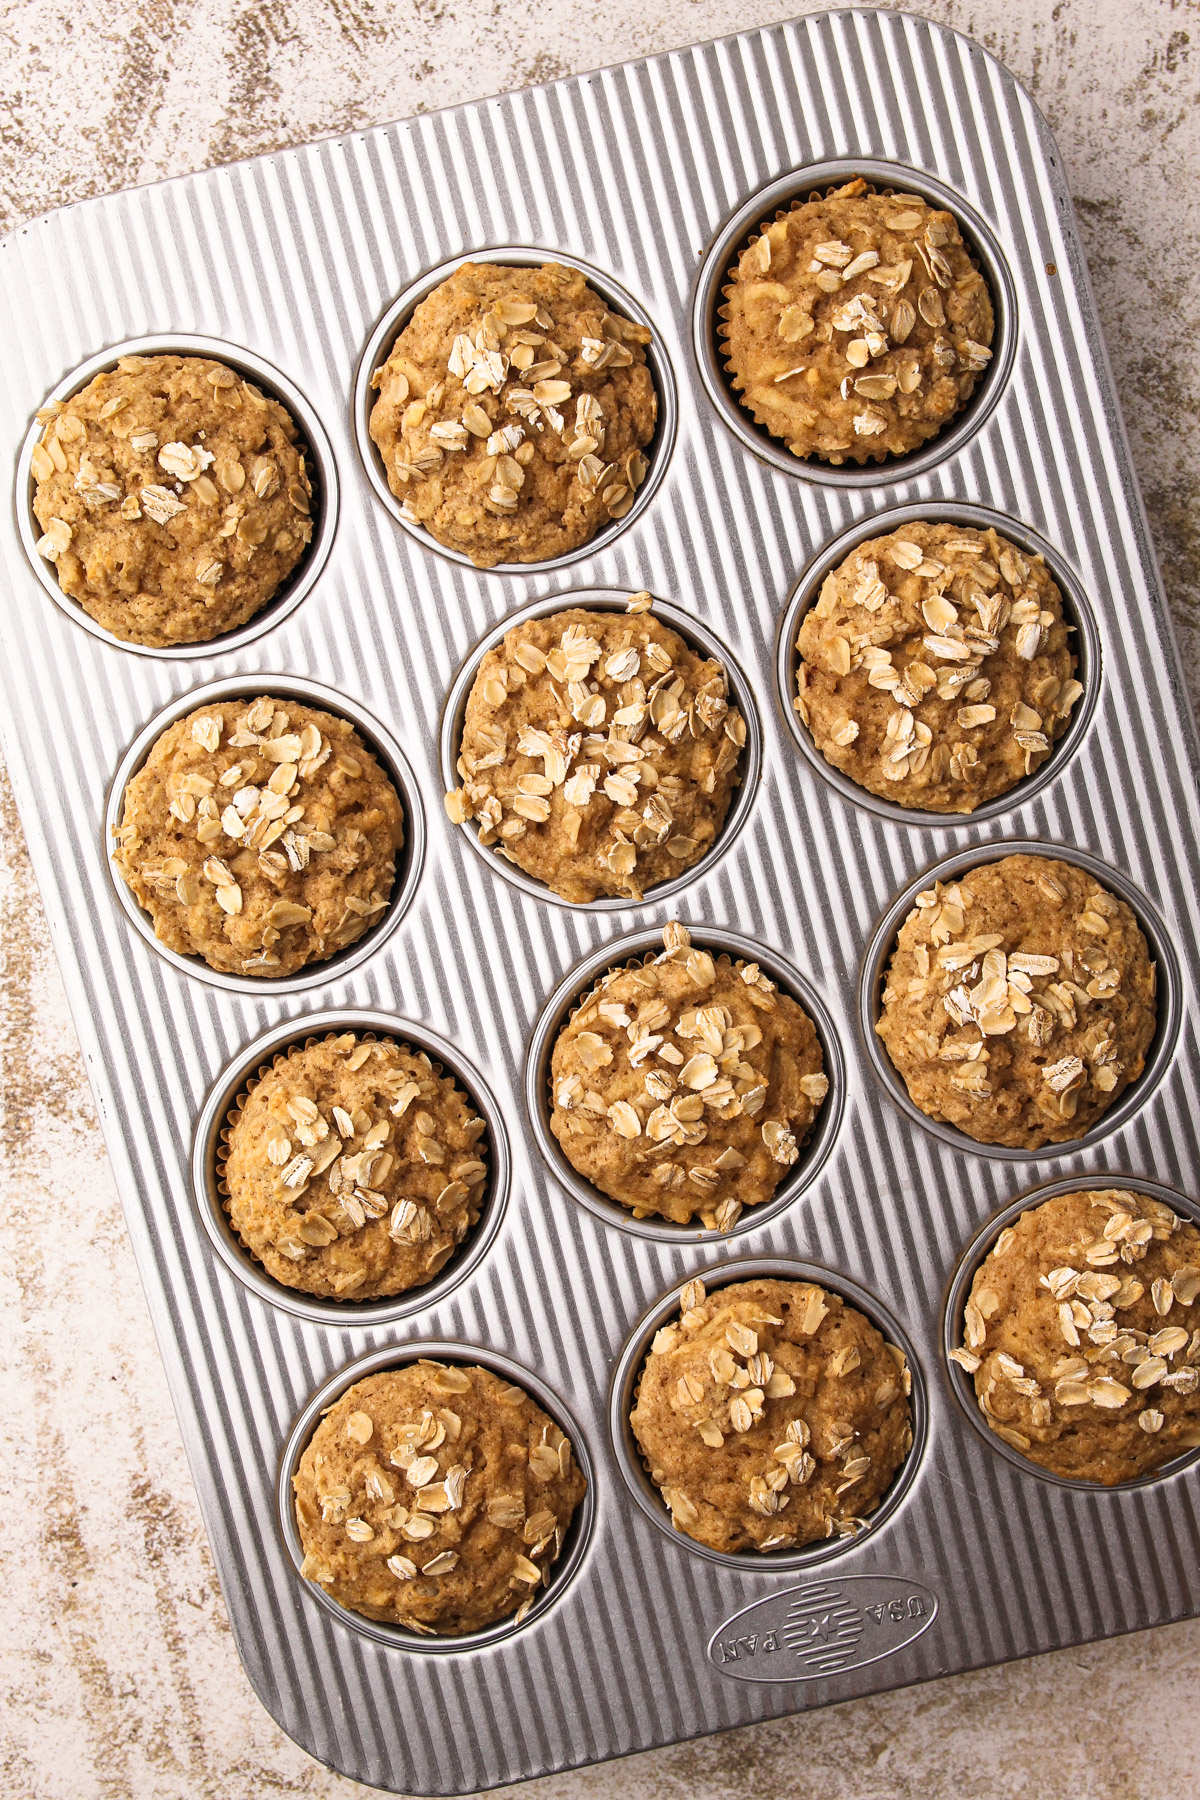 Baked healthy apple oat muffins in a metal muffin tin.